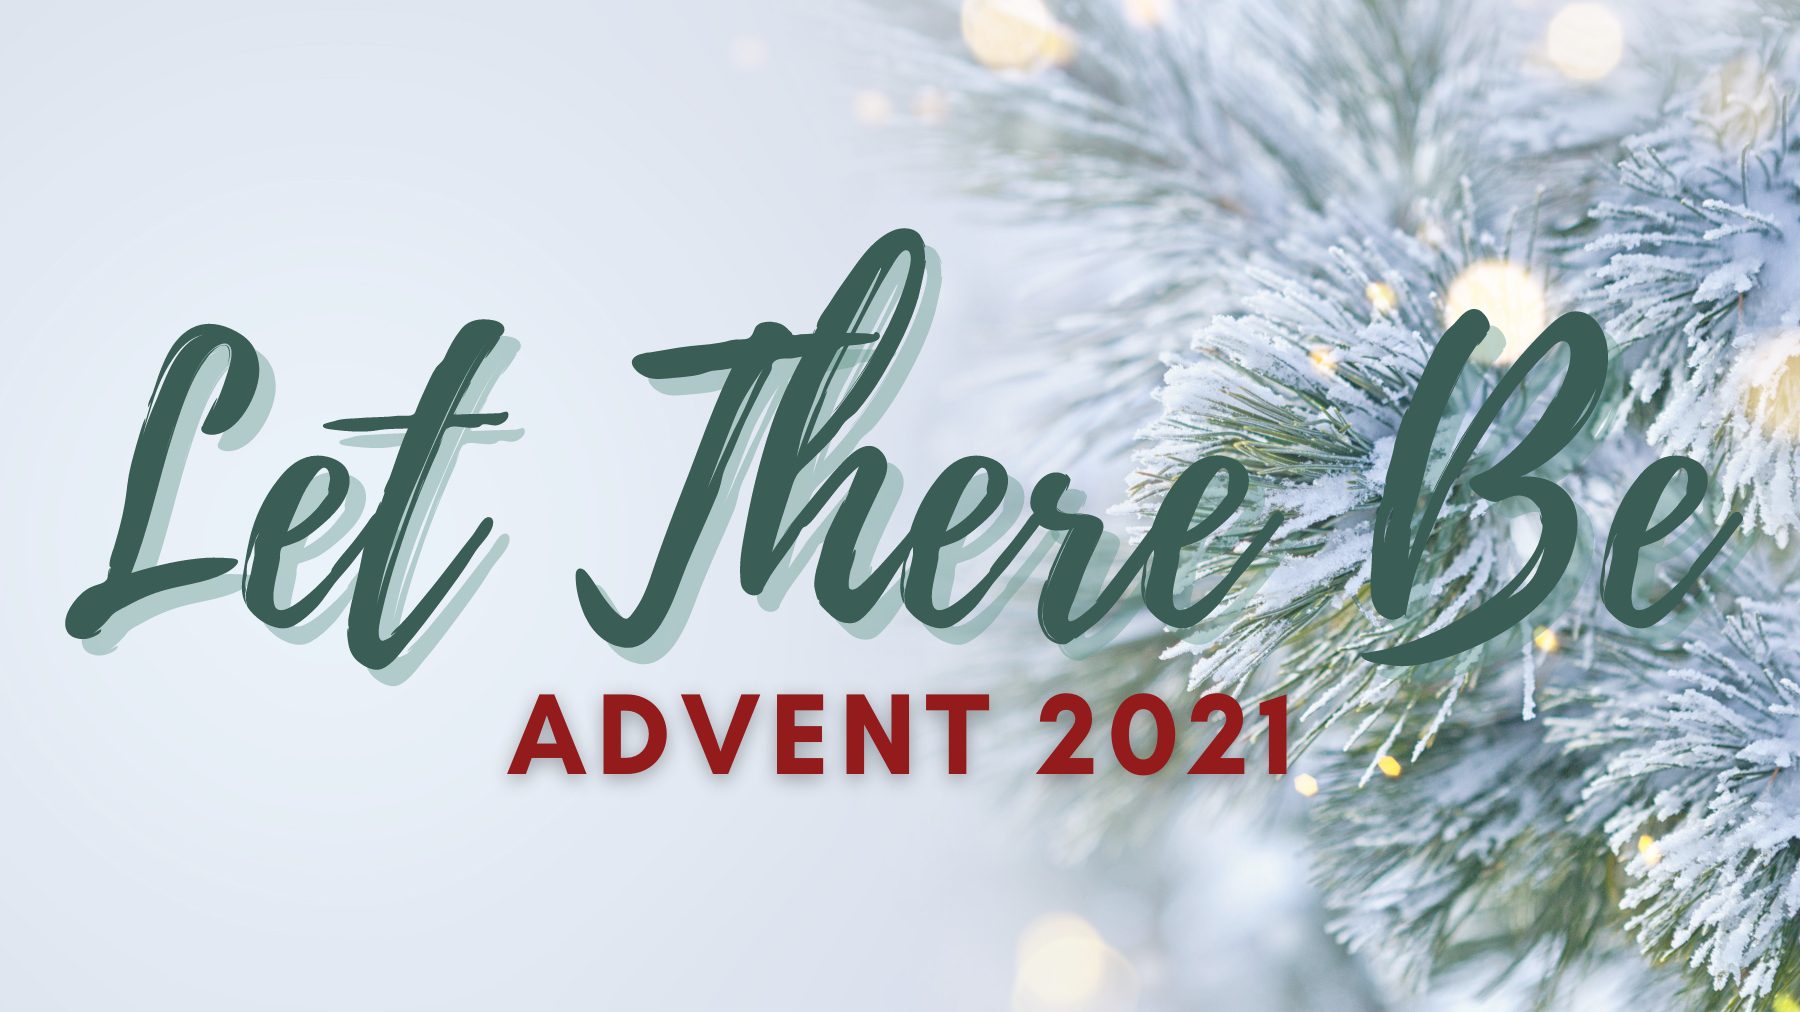 Let There Be Advent worship series